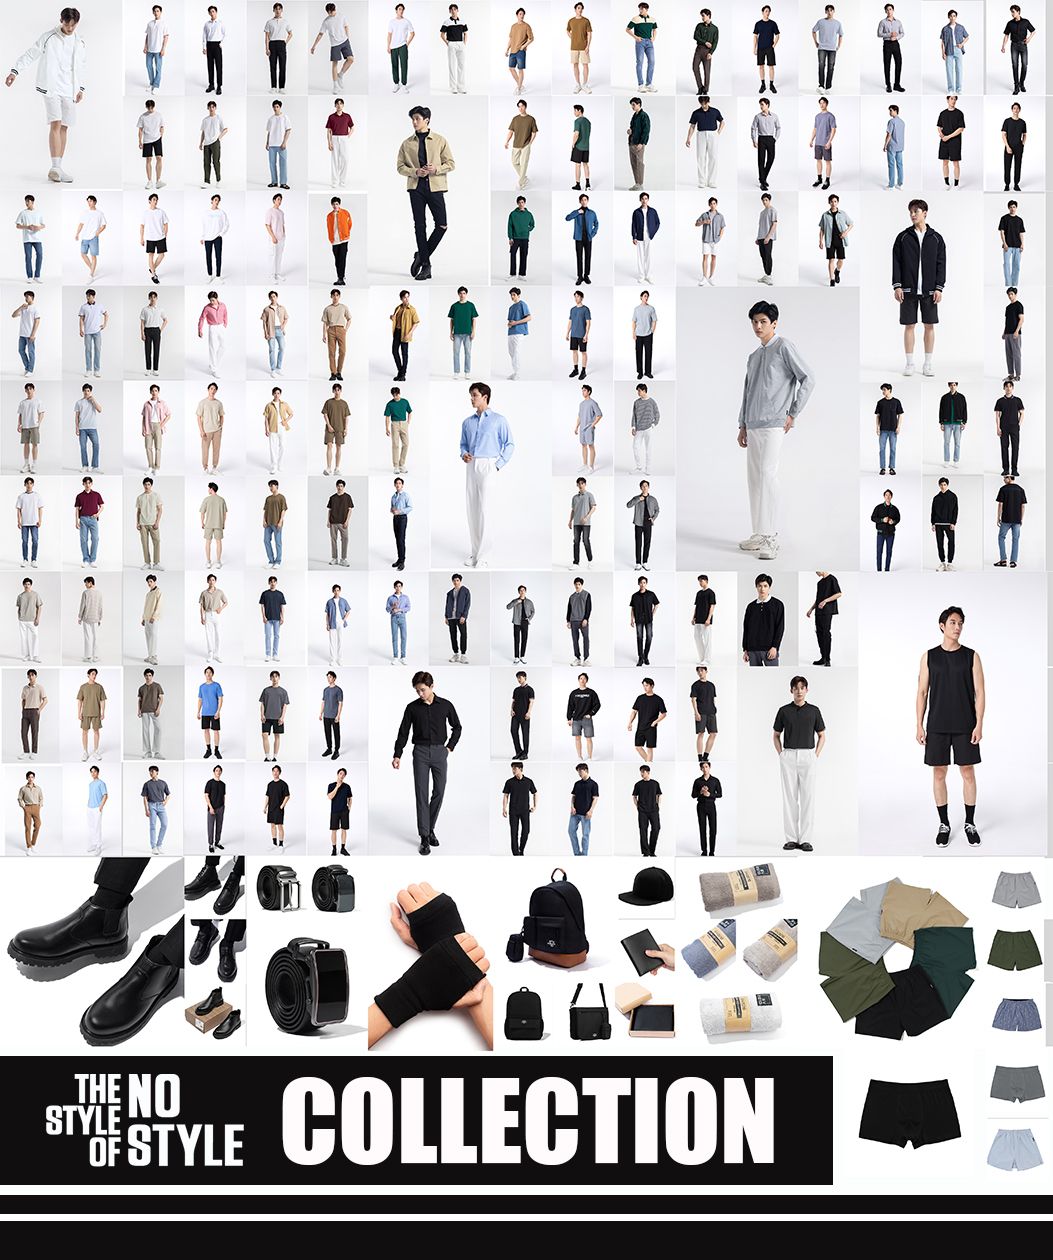 THE STYLE OF NOSTYLE COLLECTION